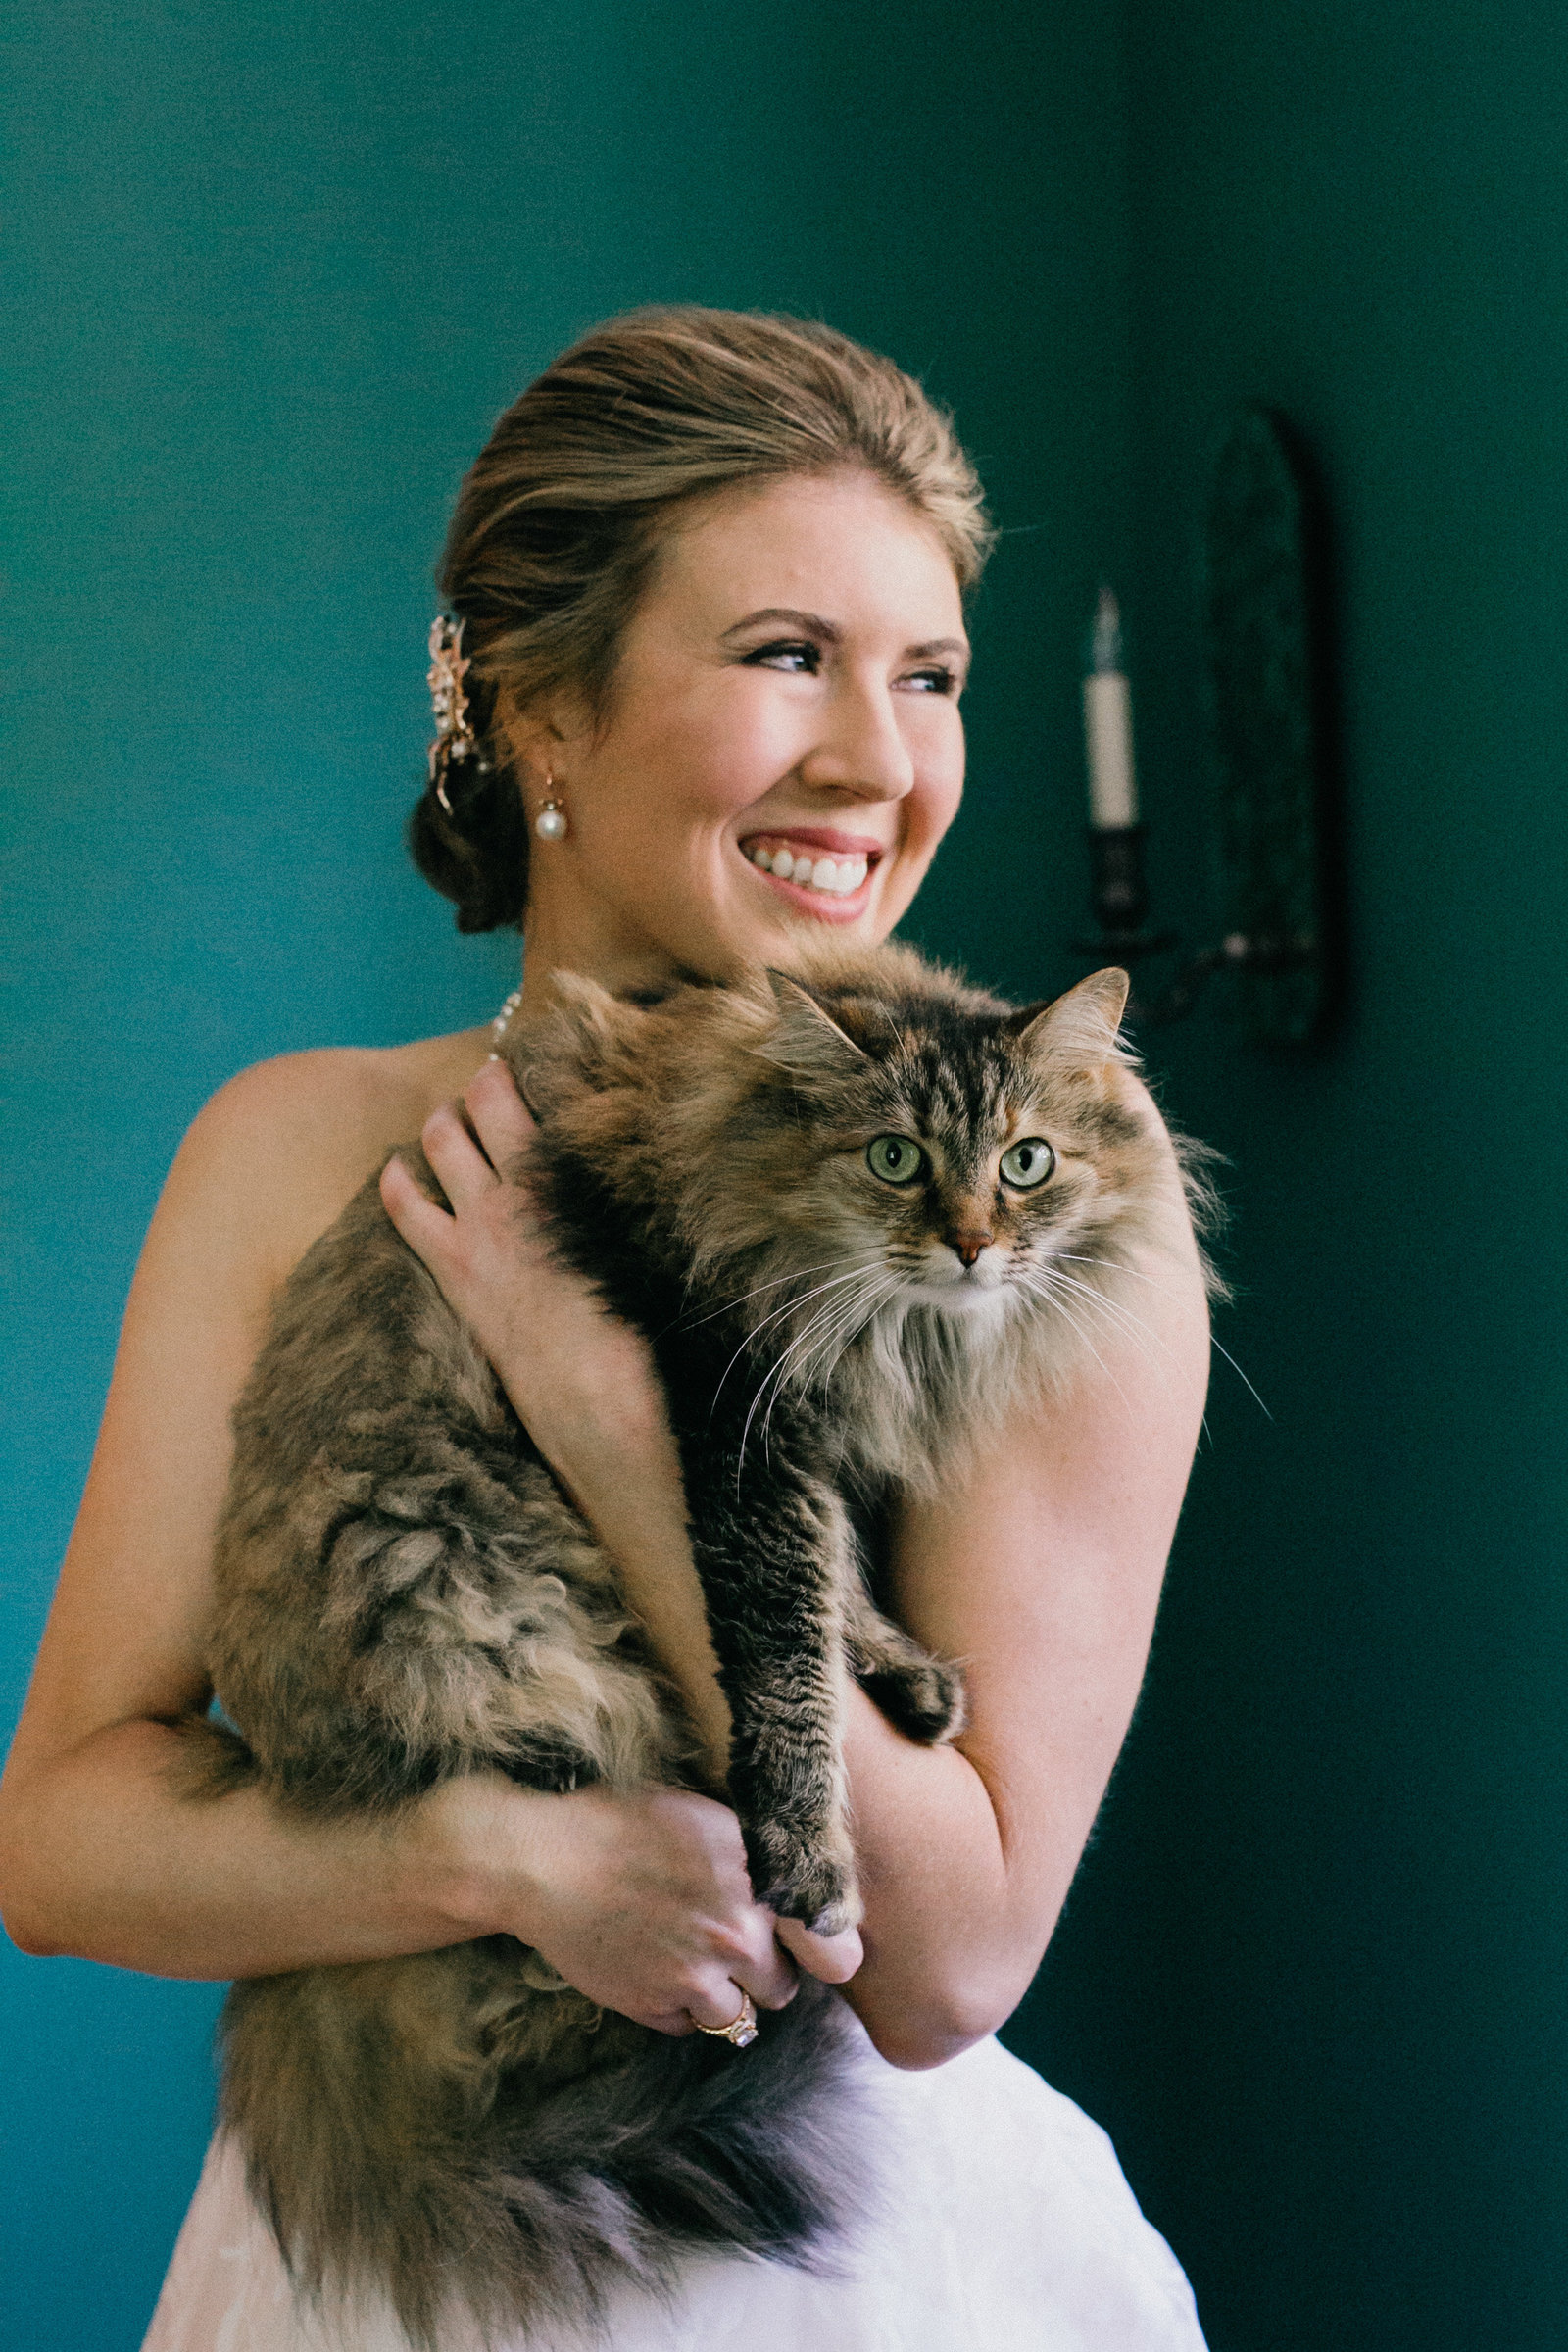 Bride photographed with her cat, before the wedding ceremony at Ellis Preserve.